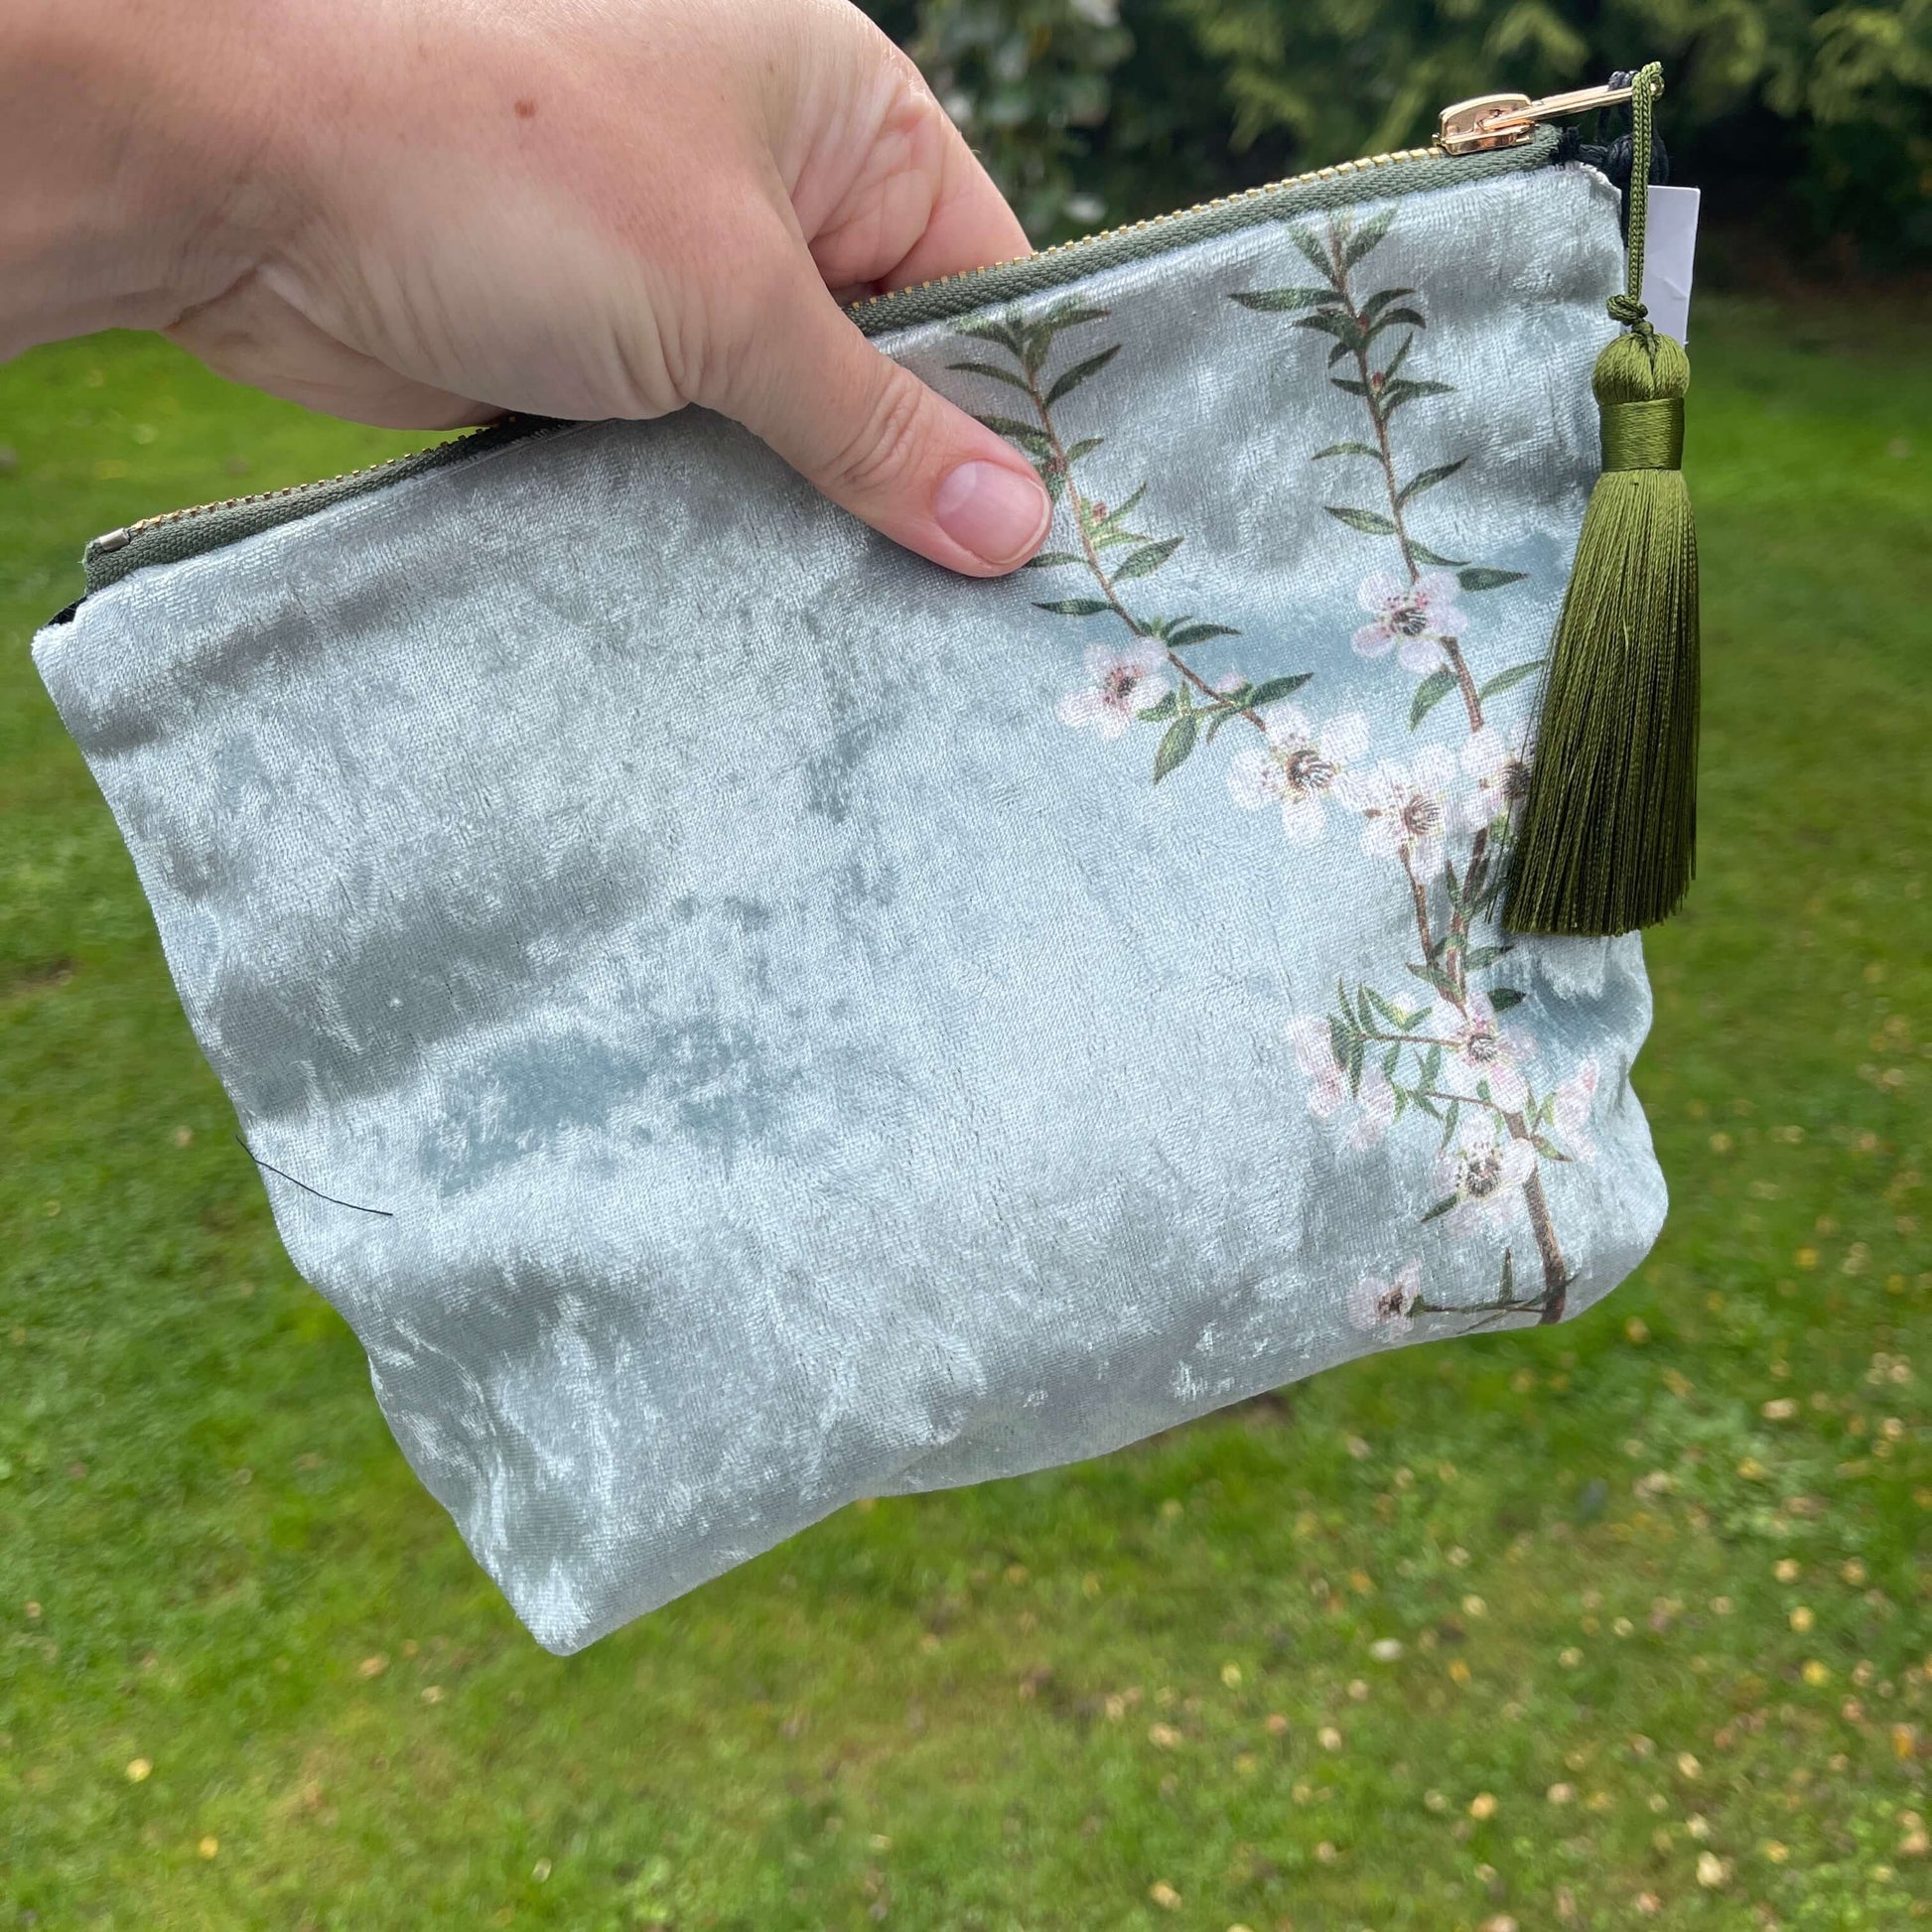 Icy blue velvet cosmetic bag with Manuka flowers and a green tassel being held in a hand.